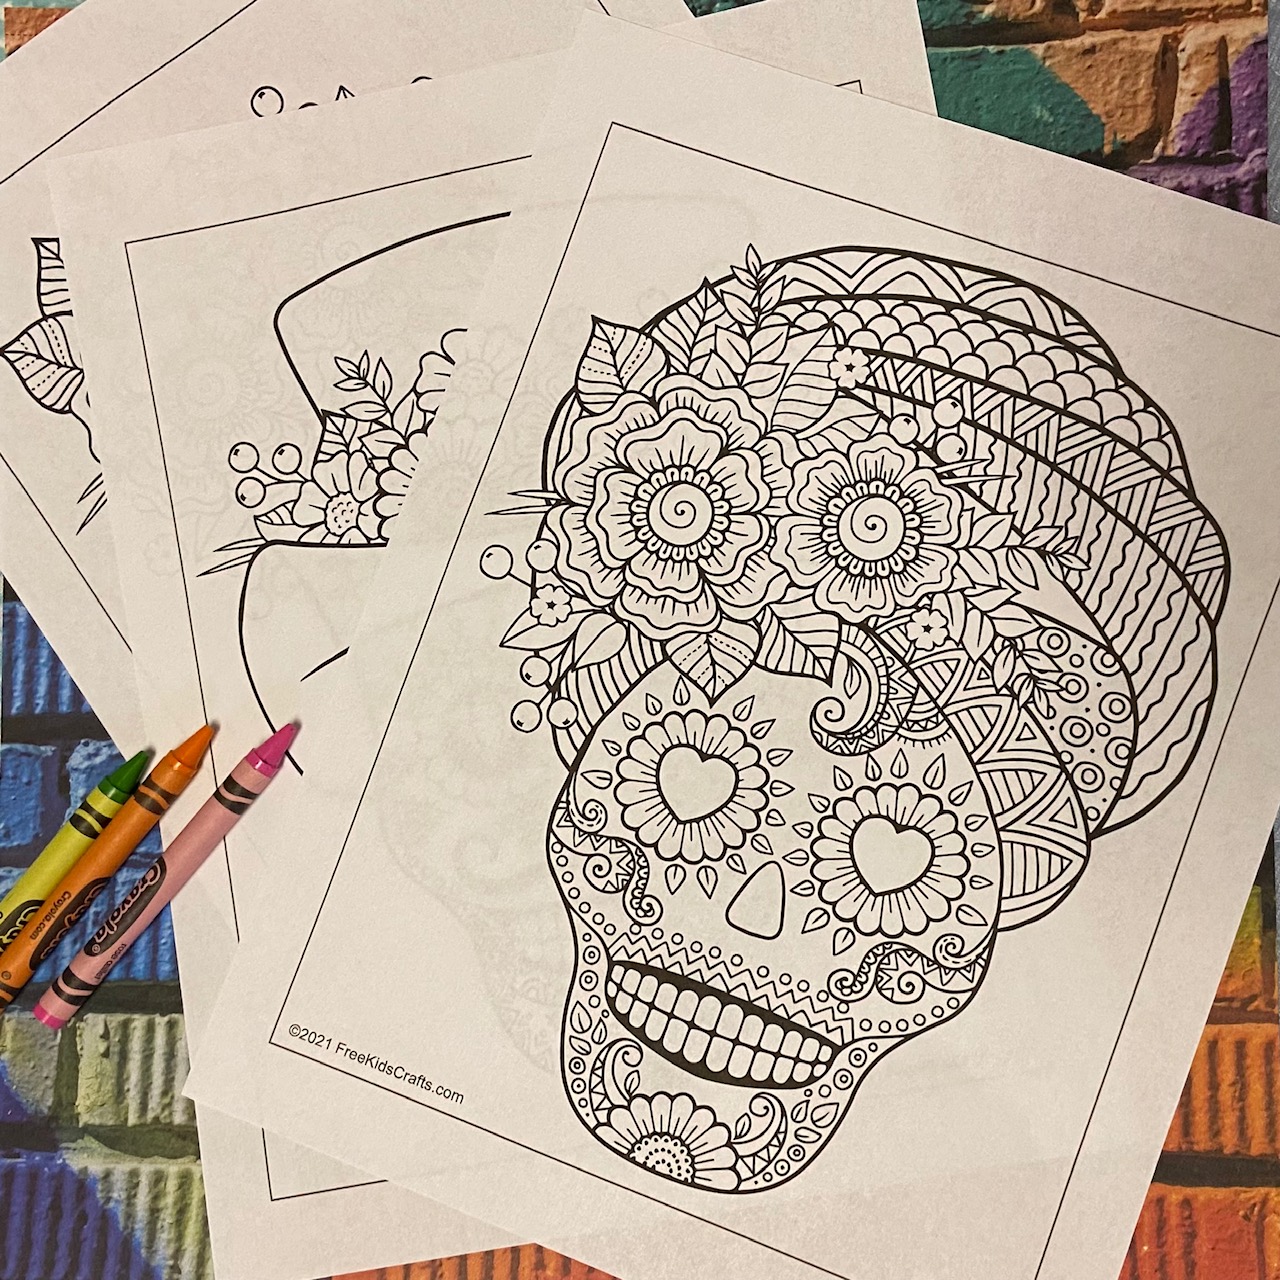 skull coloring pages for kids